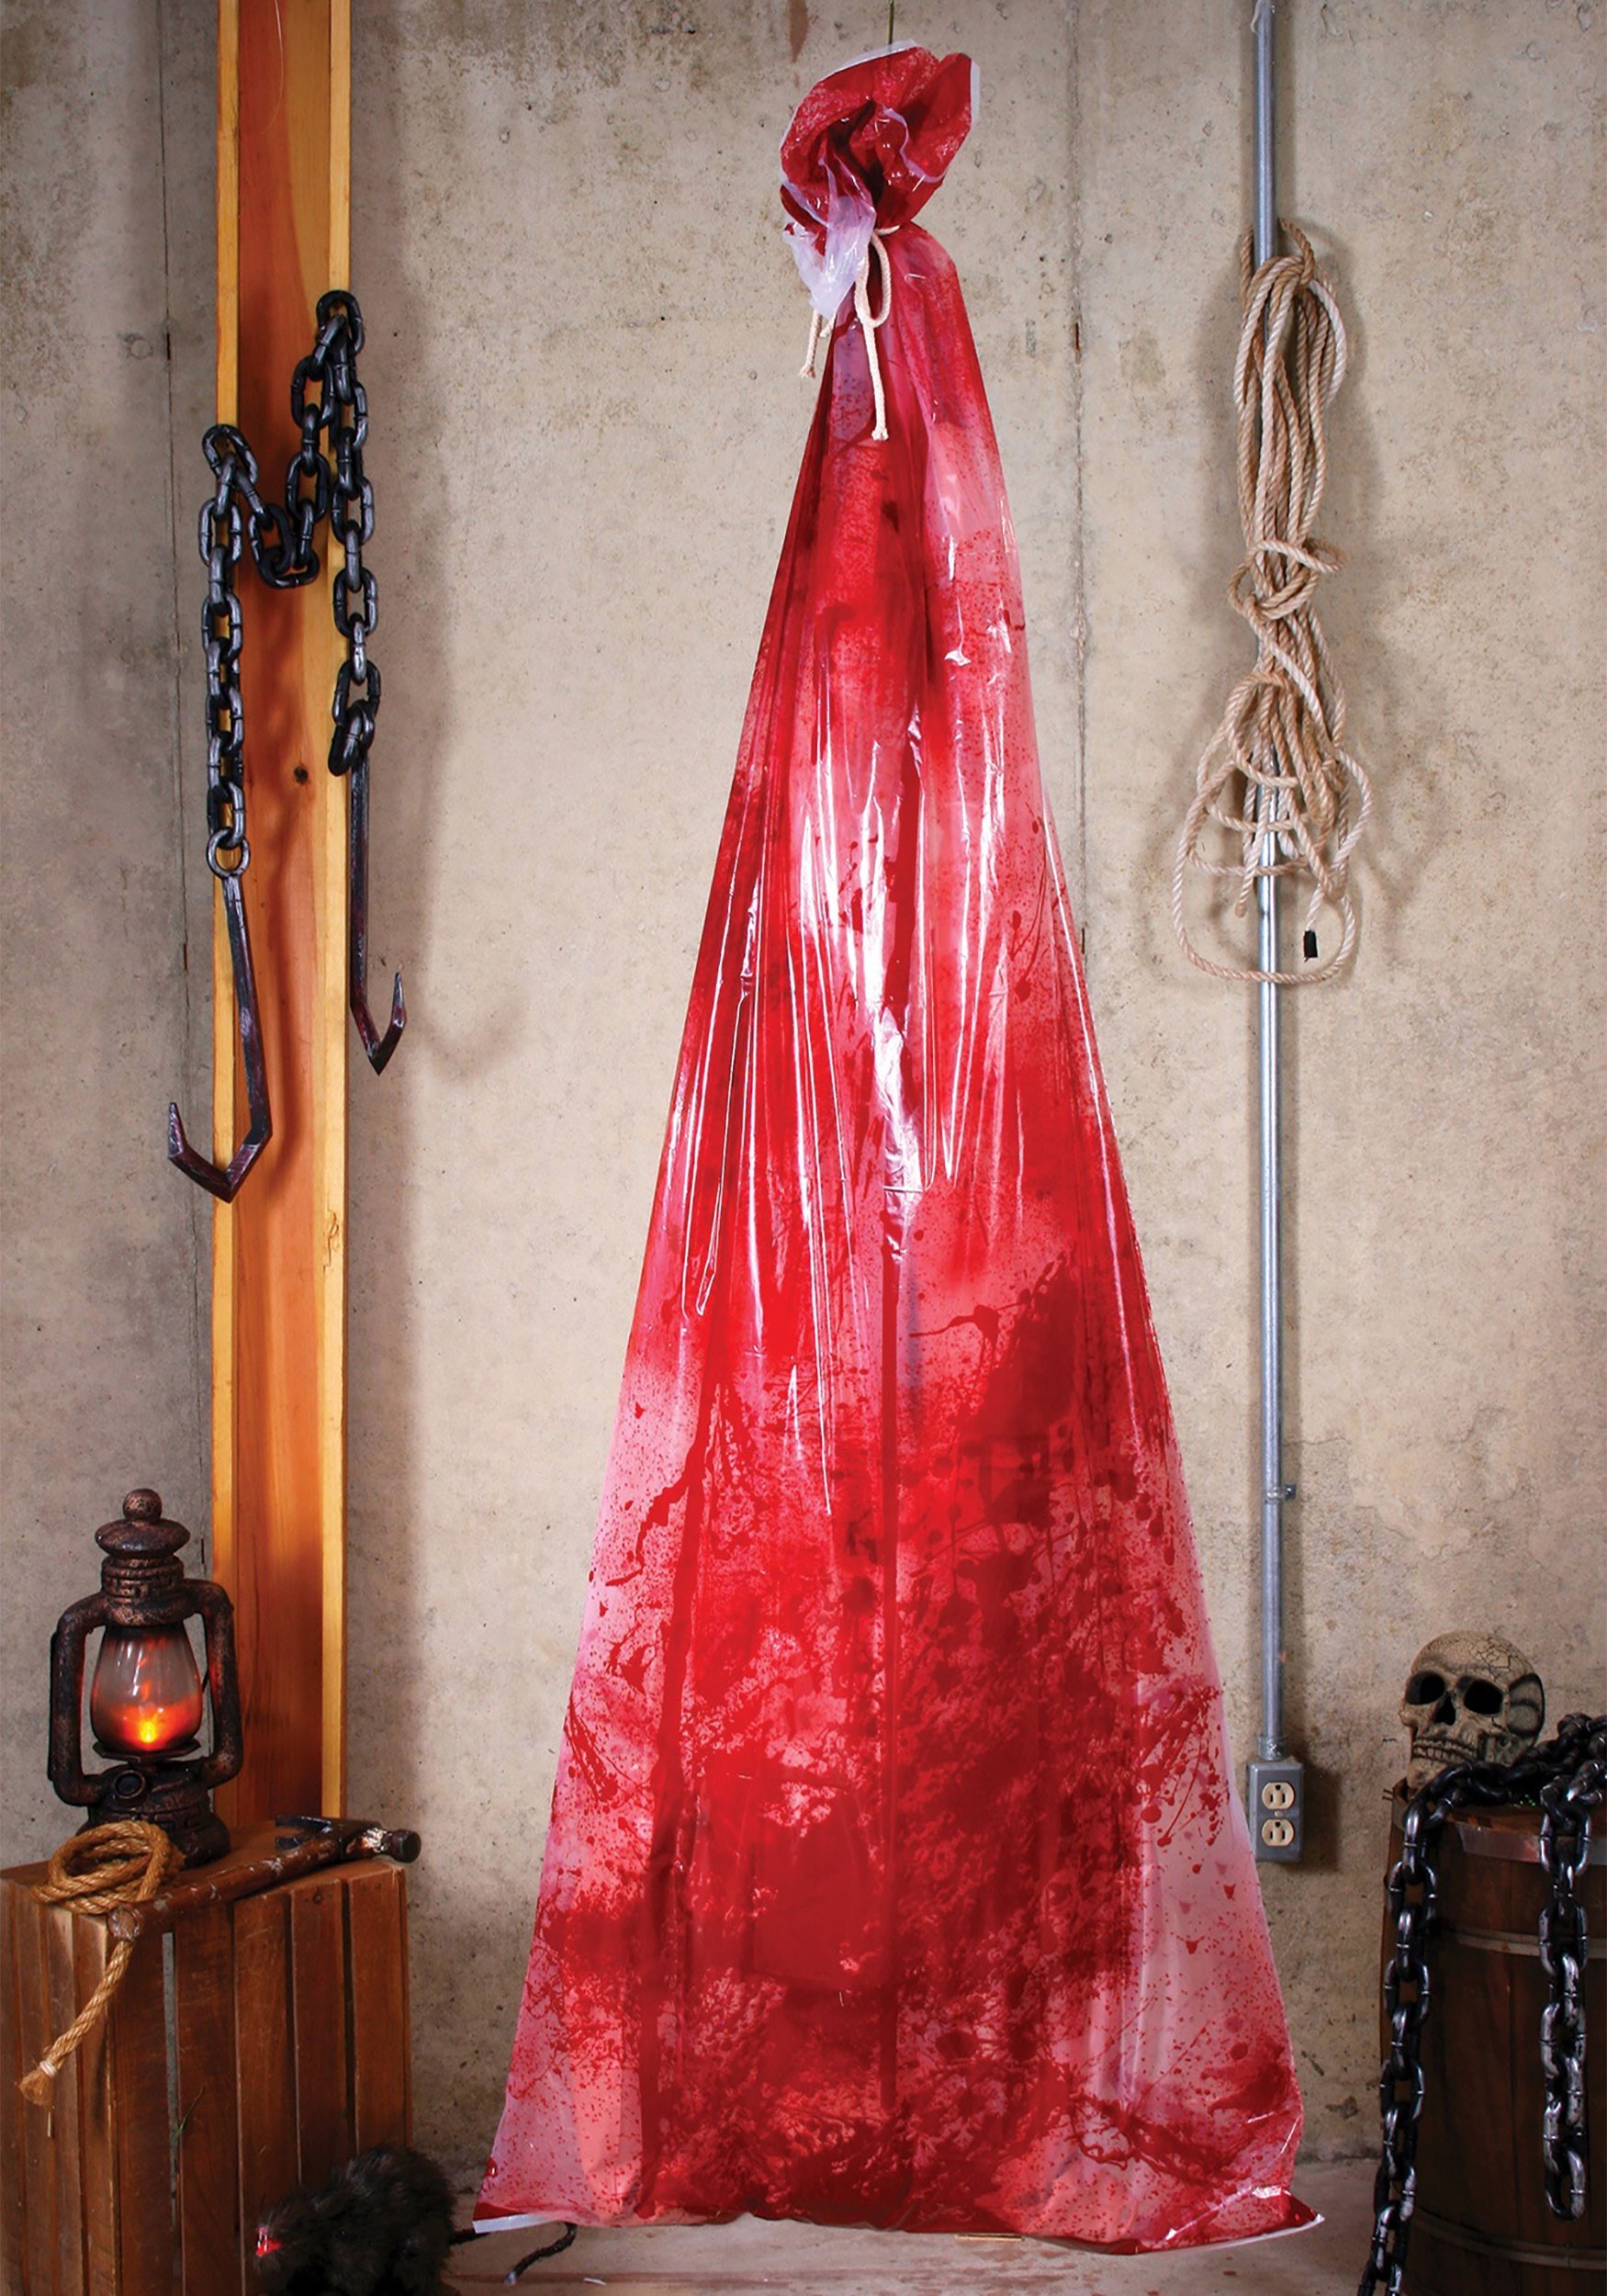 Bloody Body in a Bag Halloween Decoration